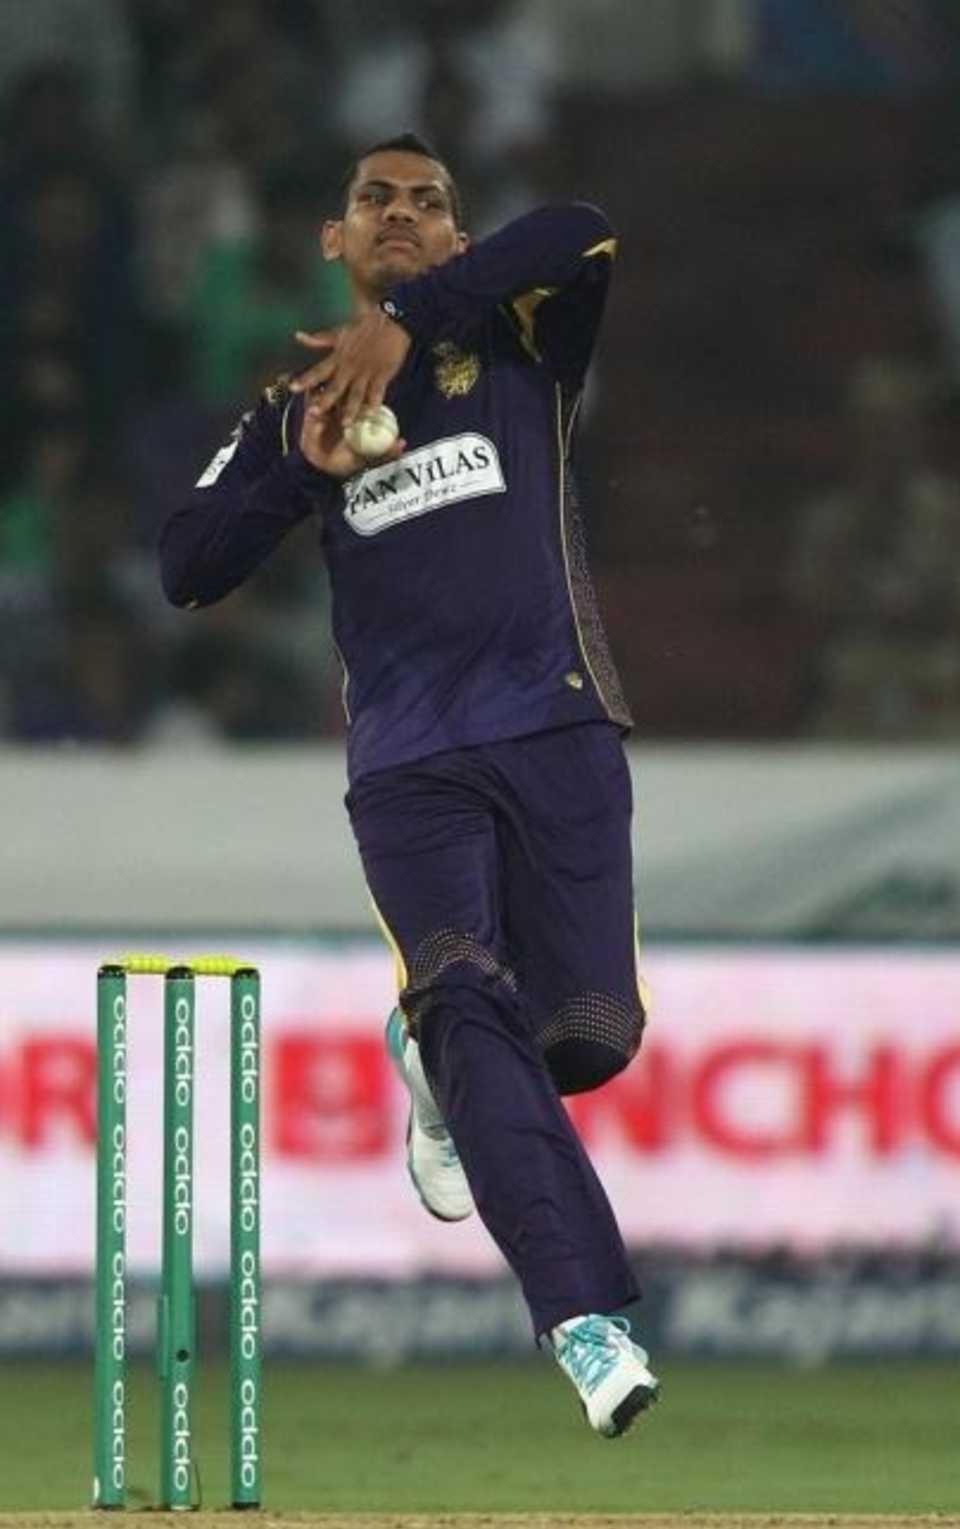 Sunil Narine approaches the crease during his spell